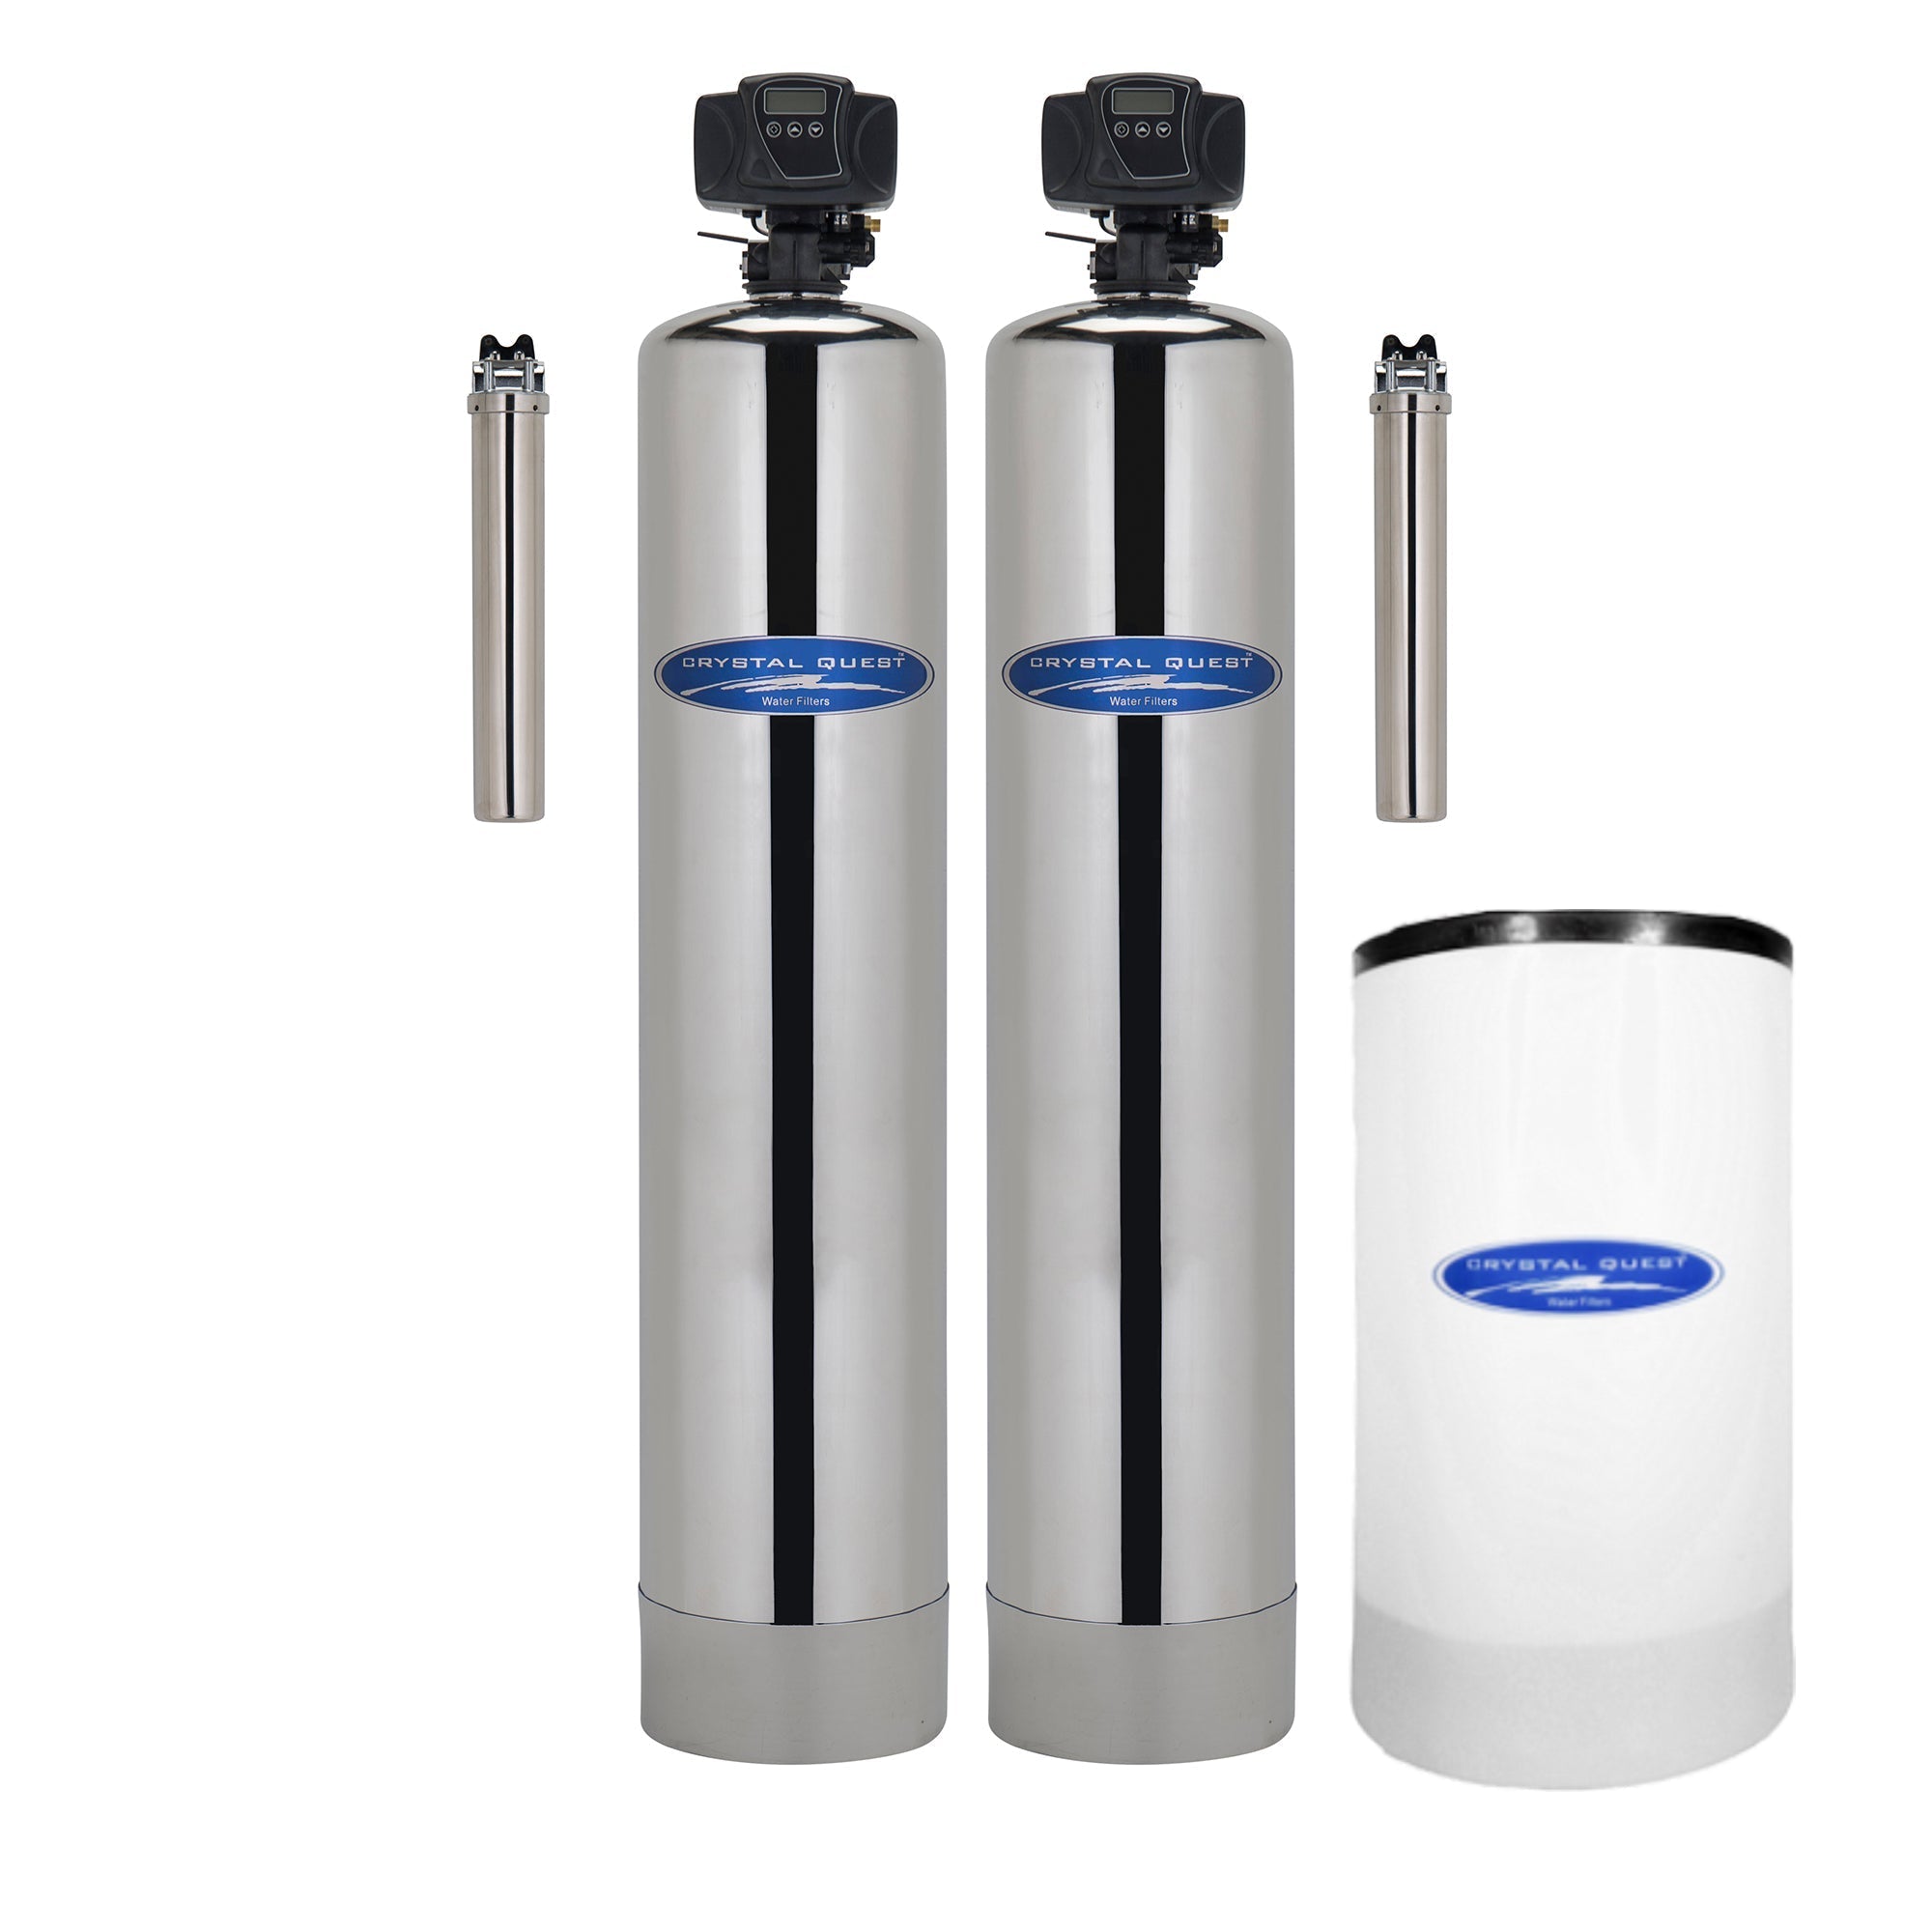 16-18 GPM / Stainless Steel Lead Removal Whole House Water Filter - Whole House Water Filters - Crystal Quest